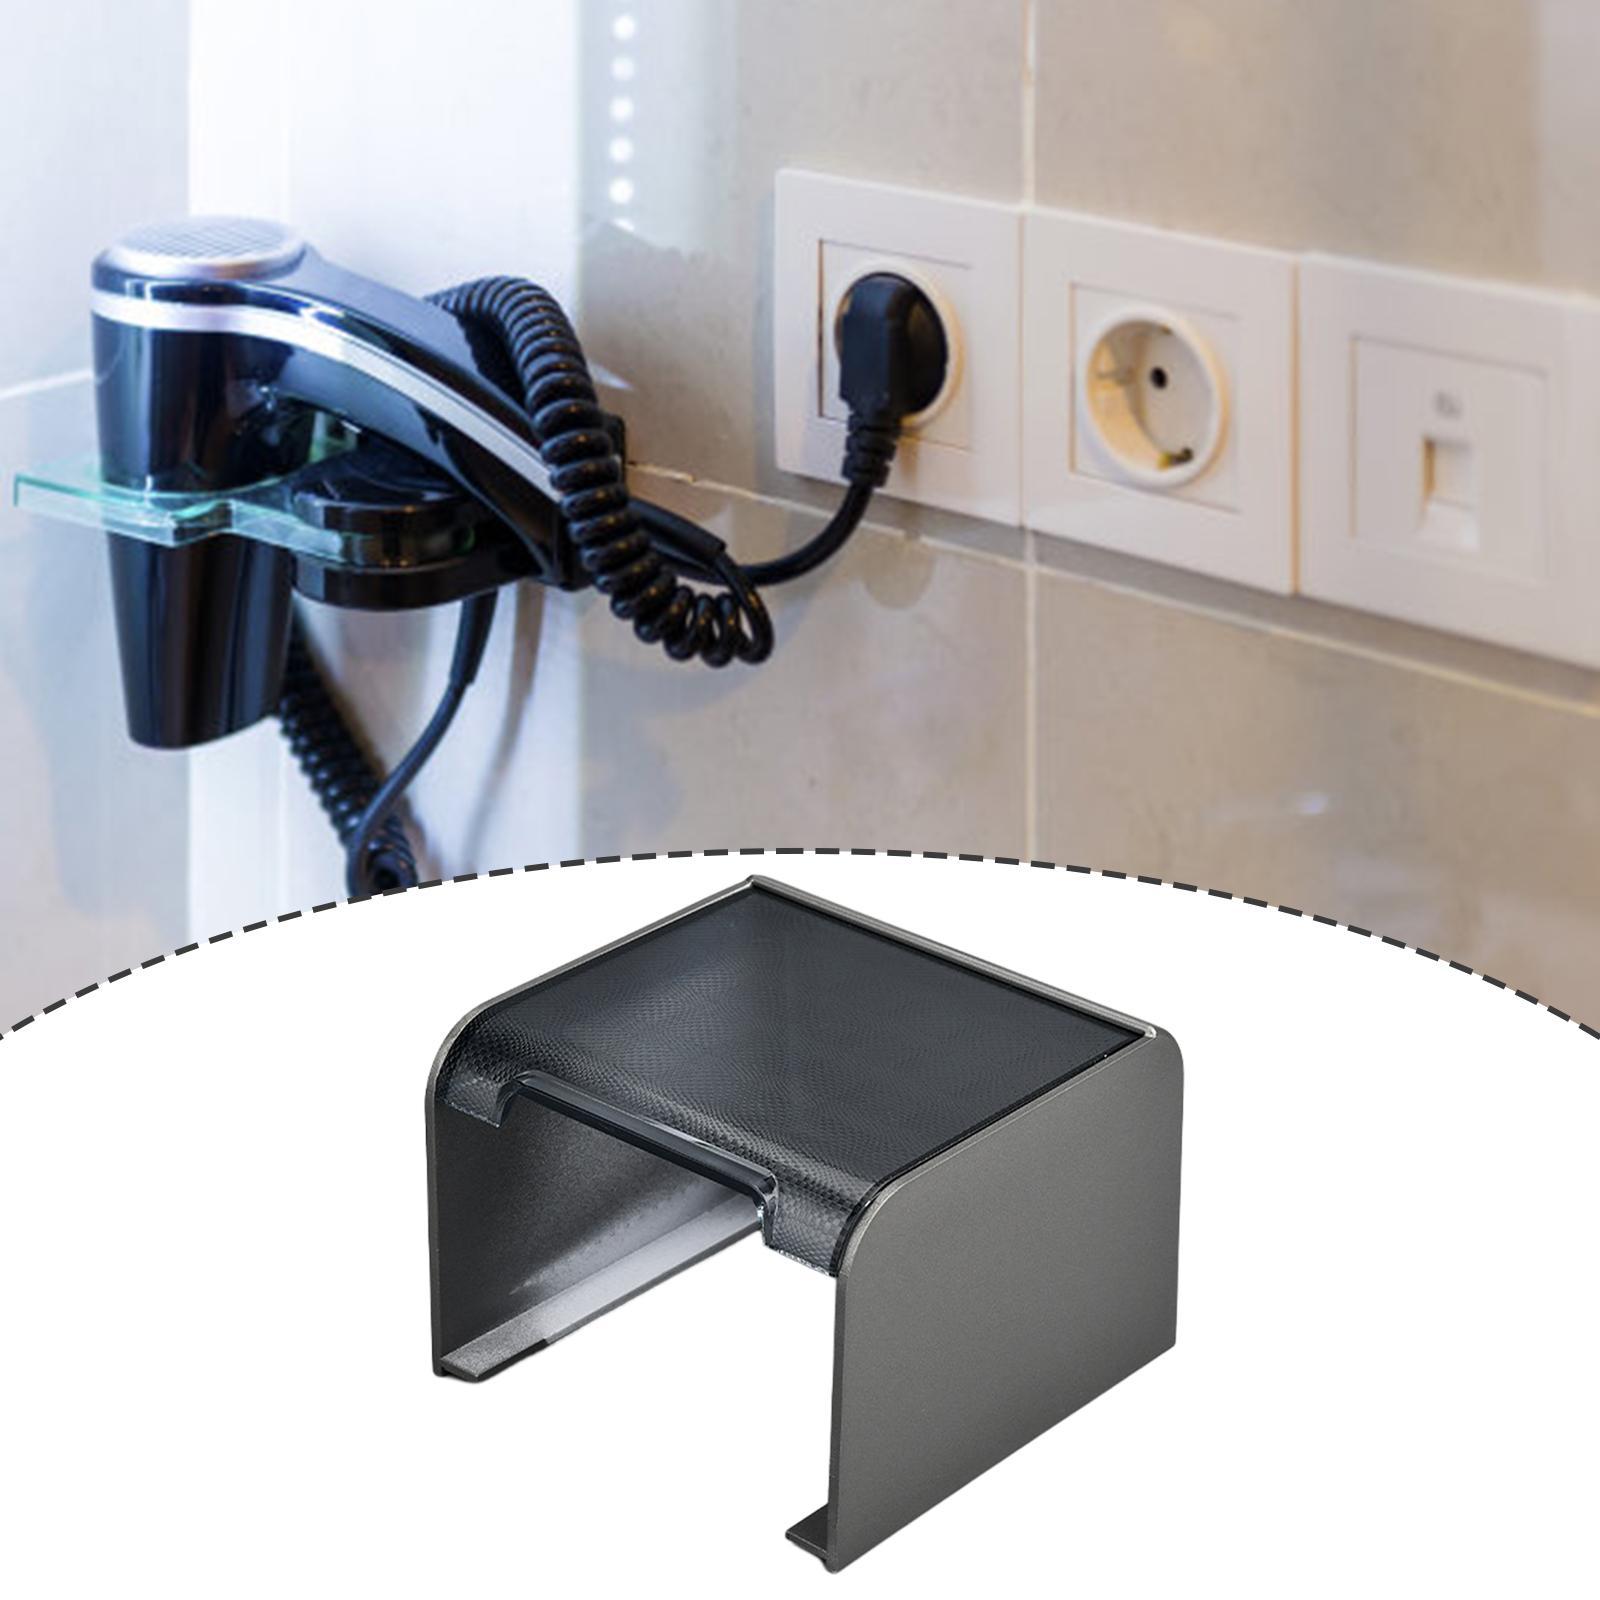 Socket Cover Plug Protector Easy to Use Outlet Box Durable Wall Switch Cover